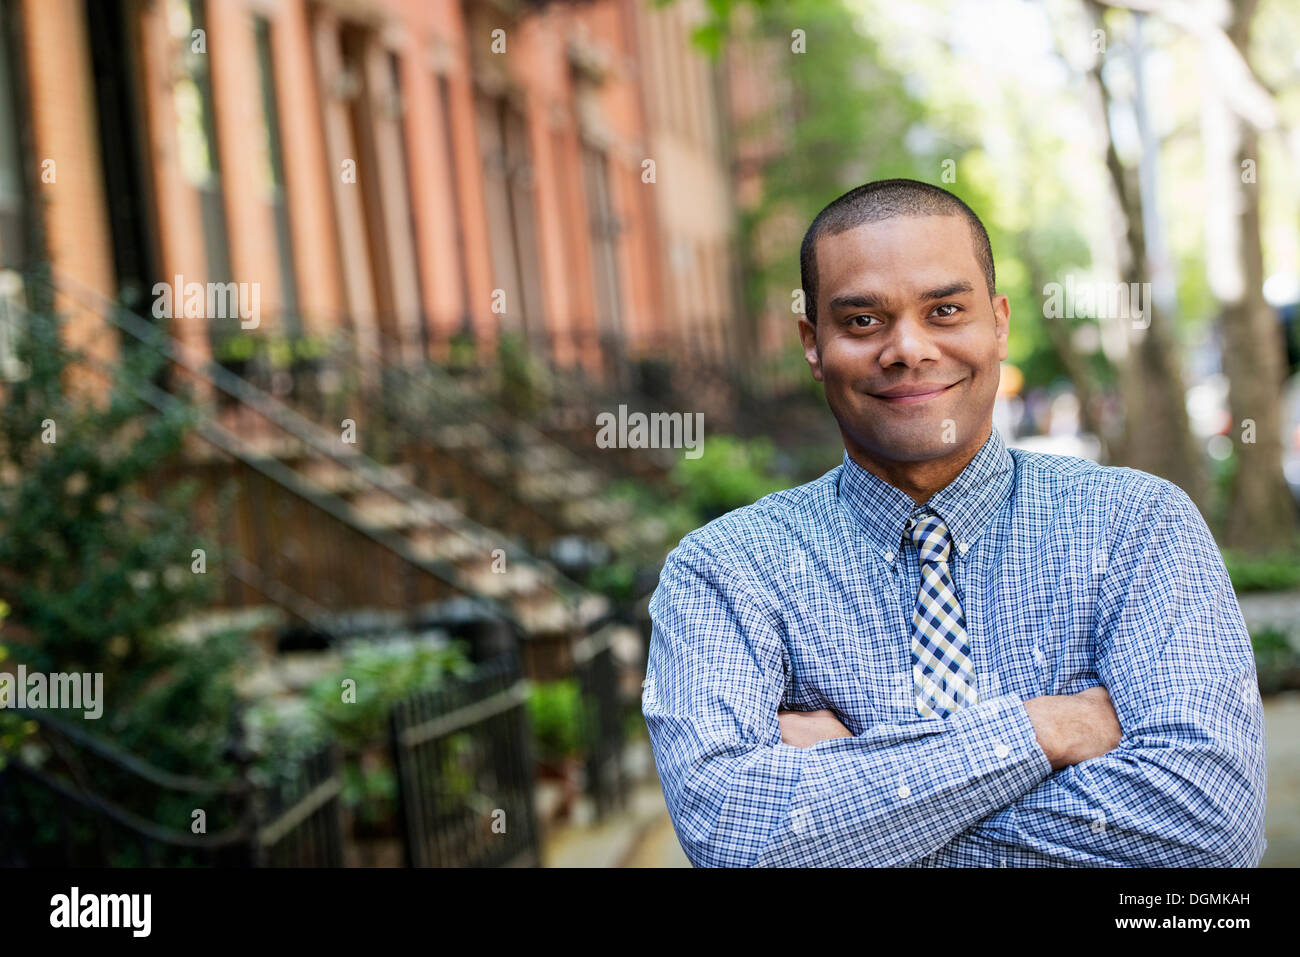 A man in a blue shirt and tie standing on a city street. Stock Photo